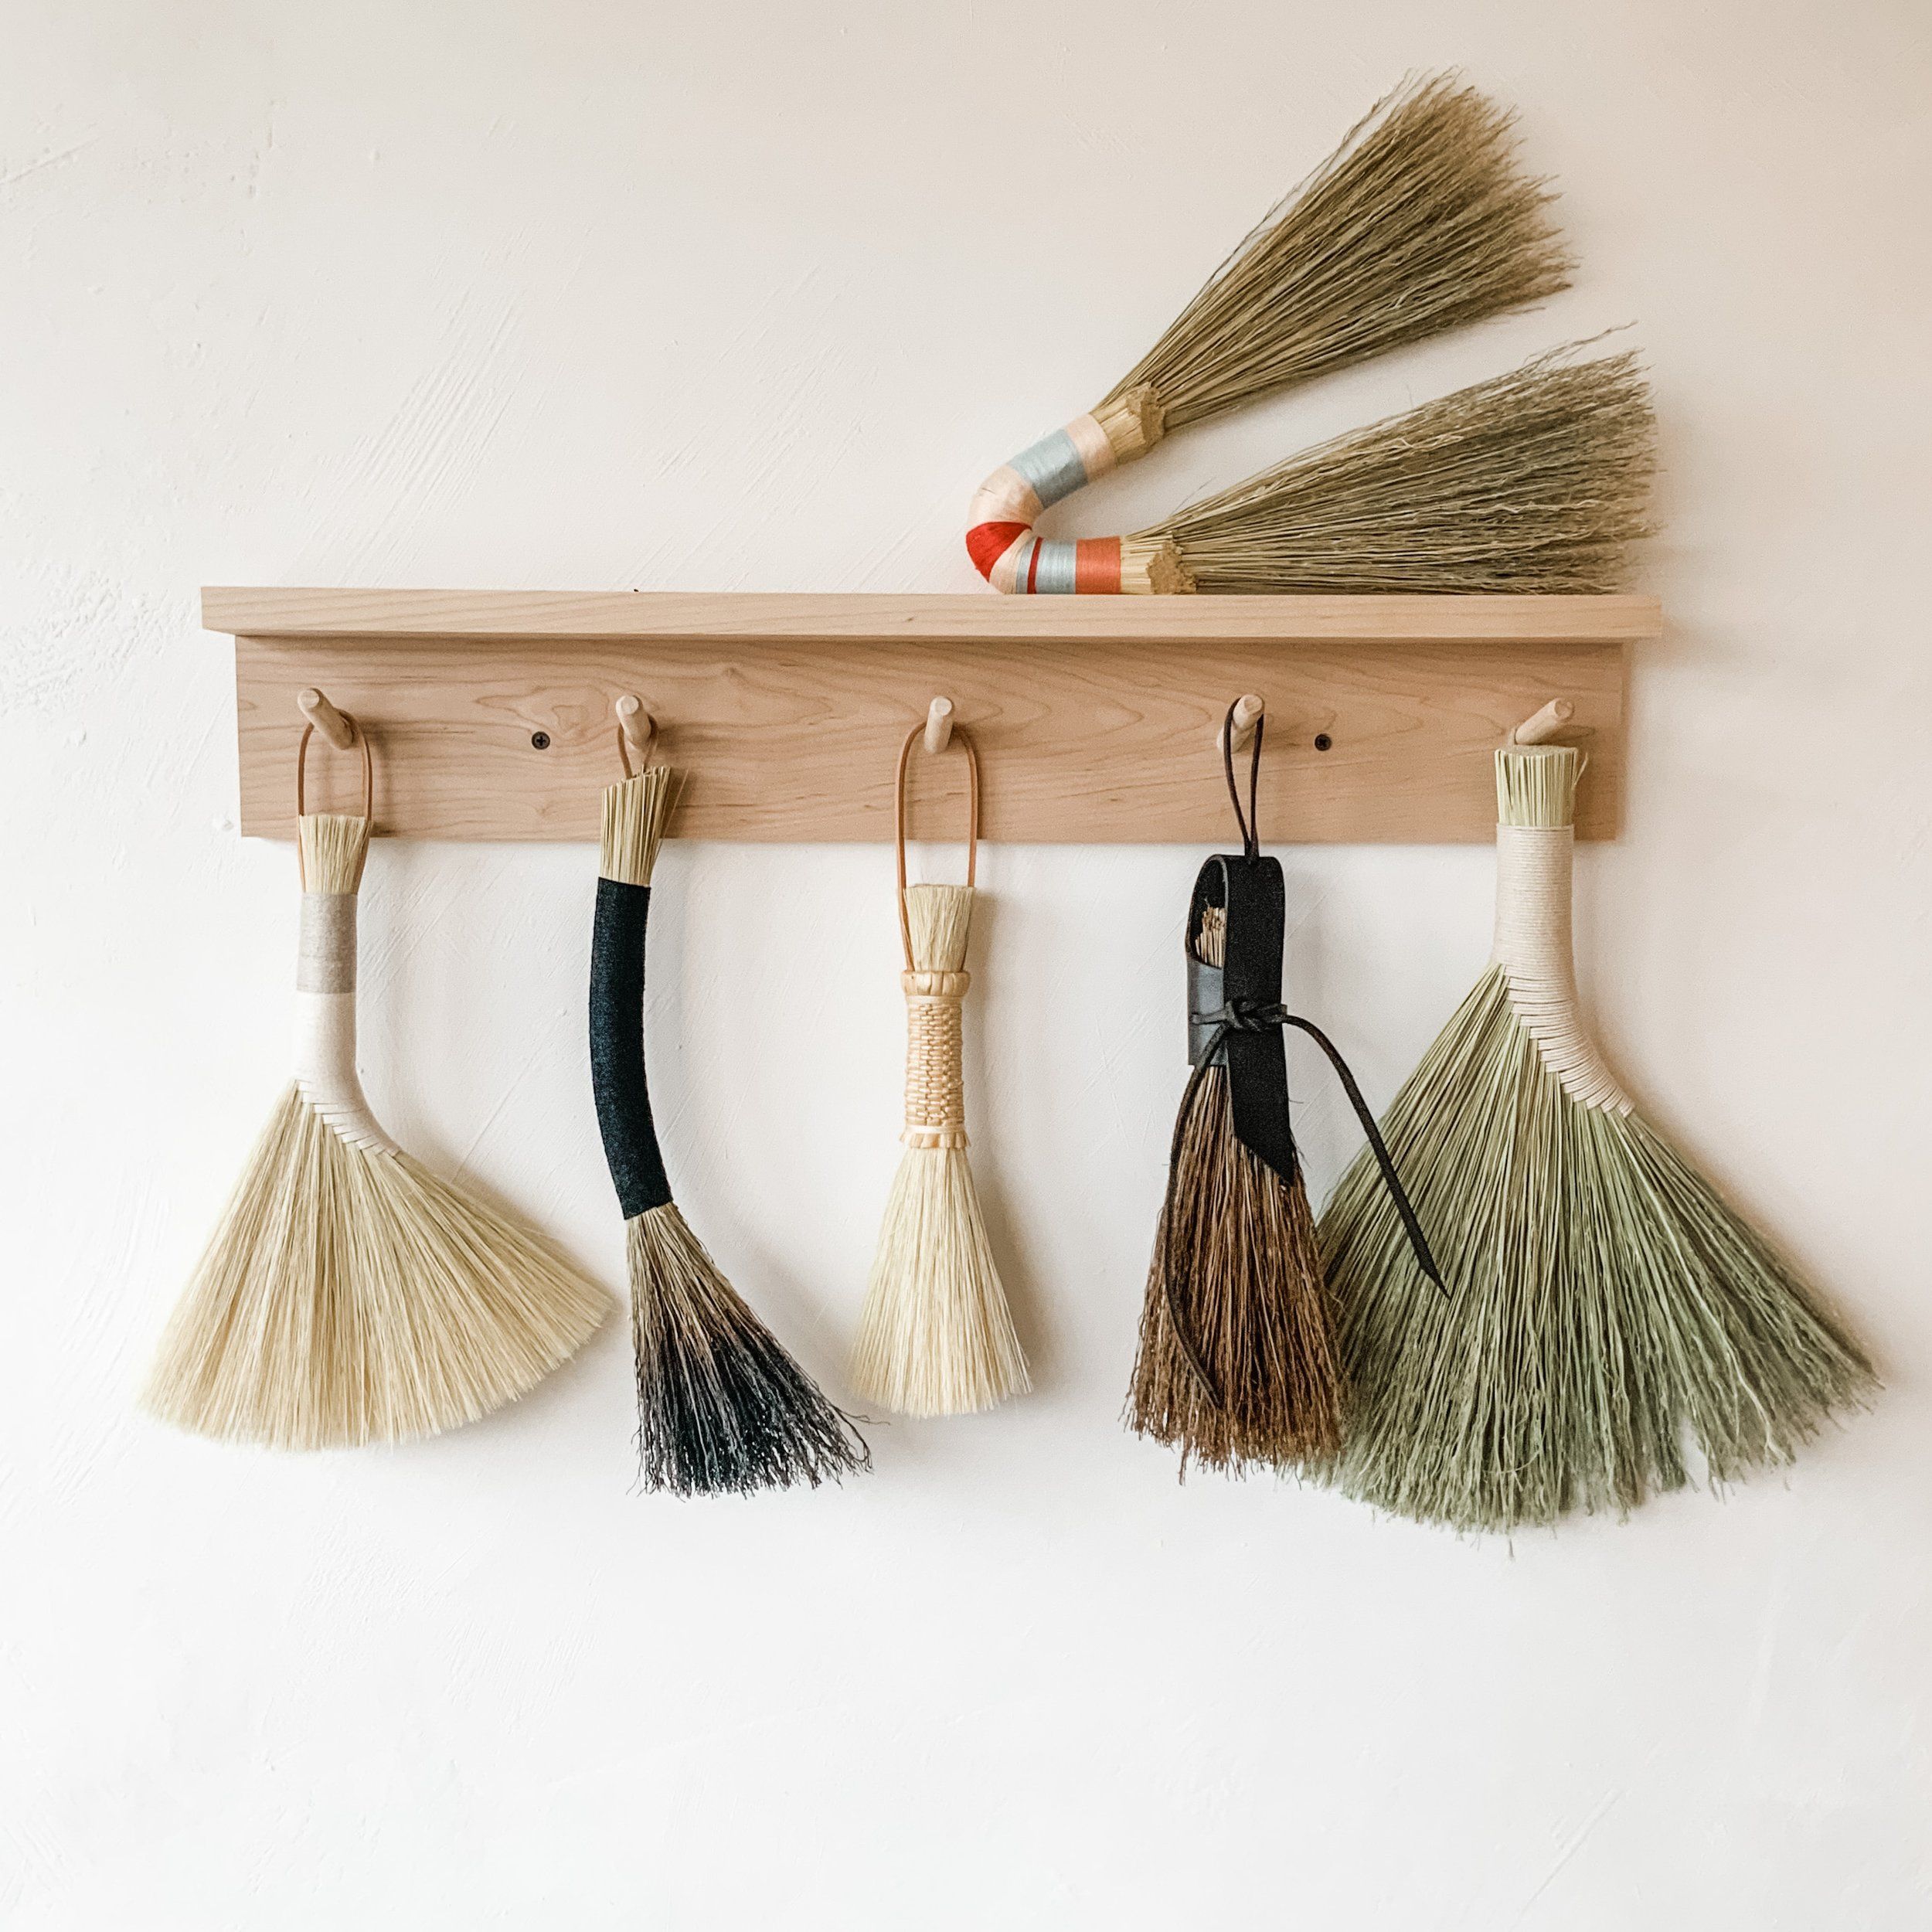 Samples of brooms hanging on hooks